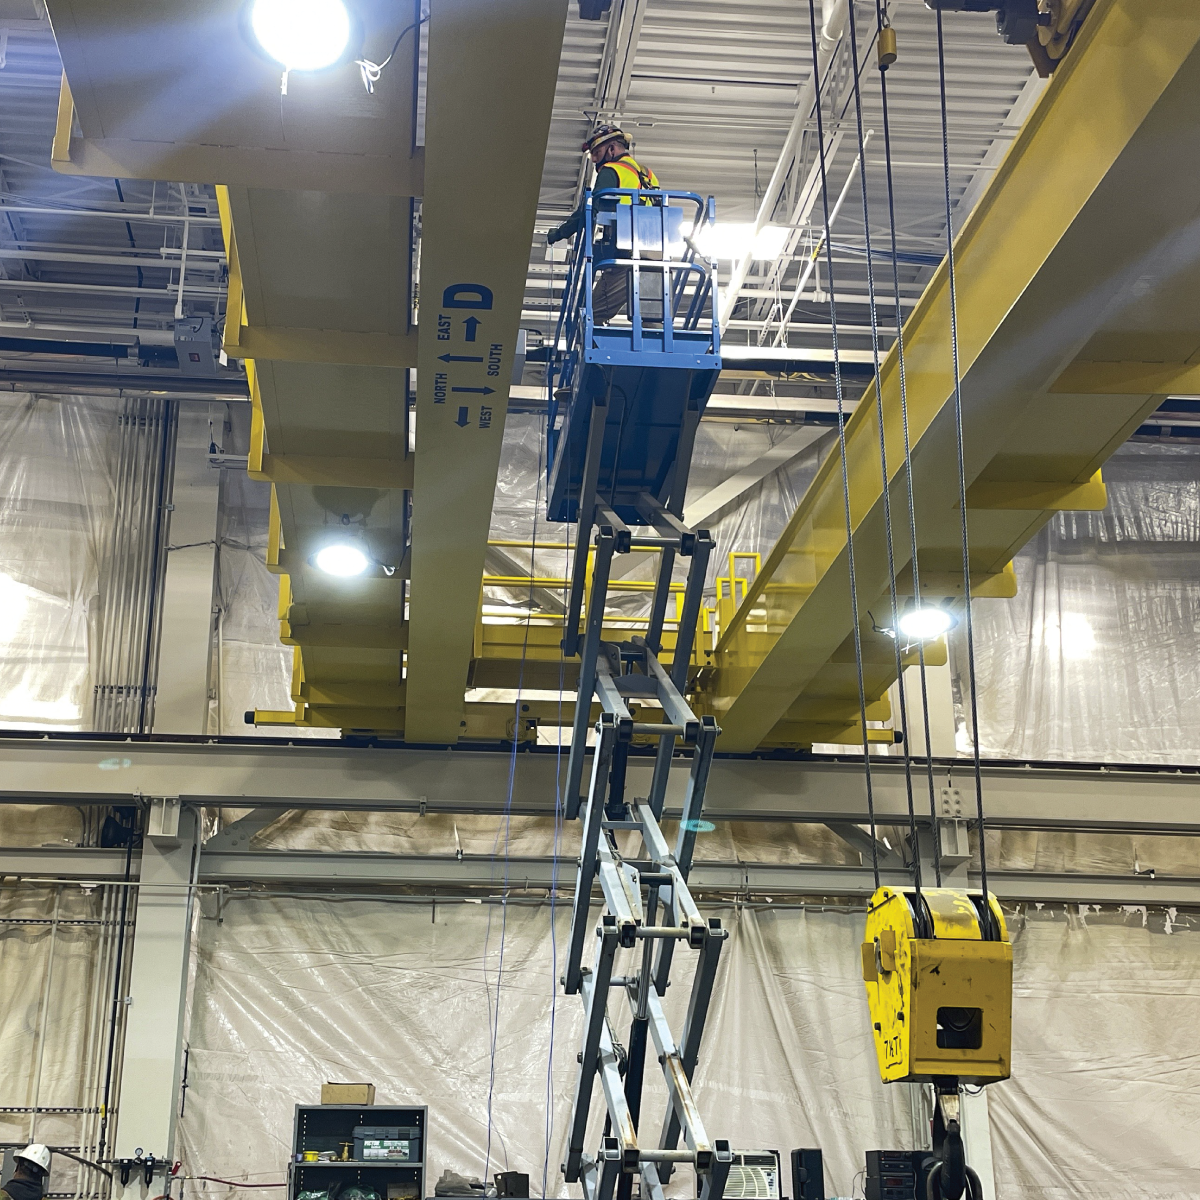 A crew member in a lift working on crane machinery at the Wellington Vehicle Facility